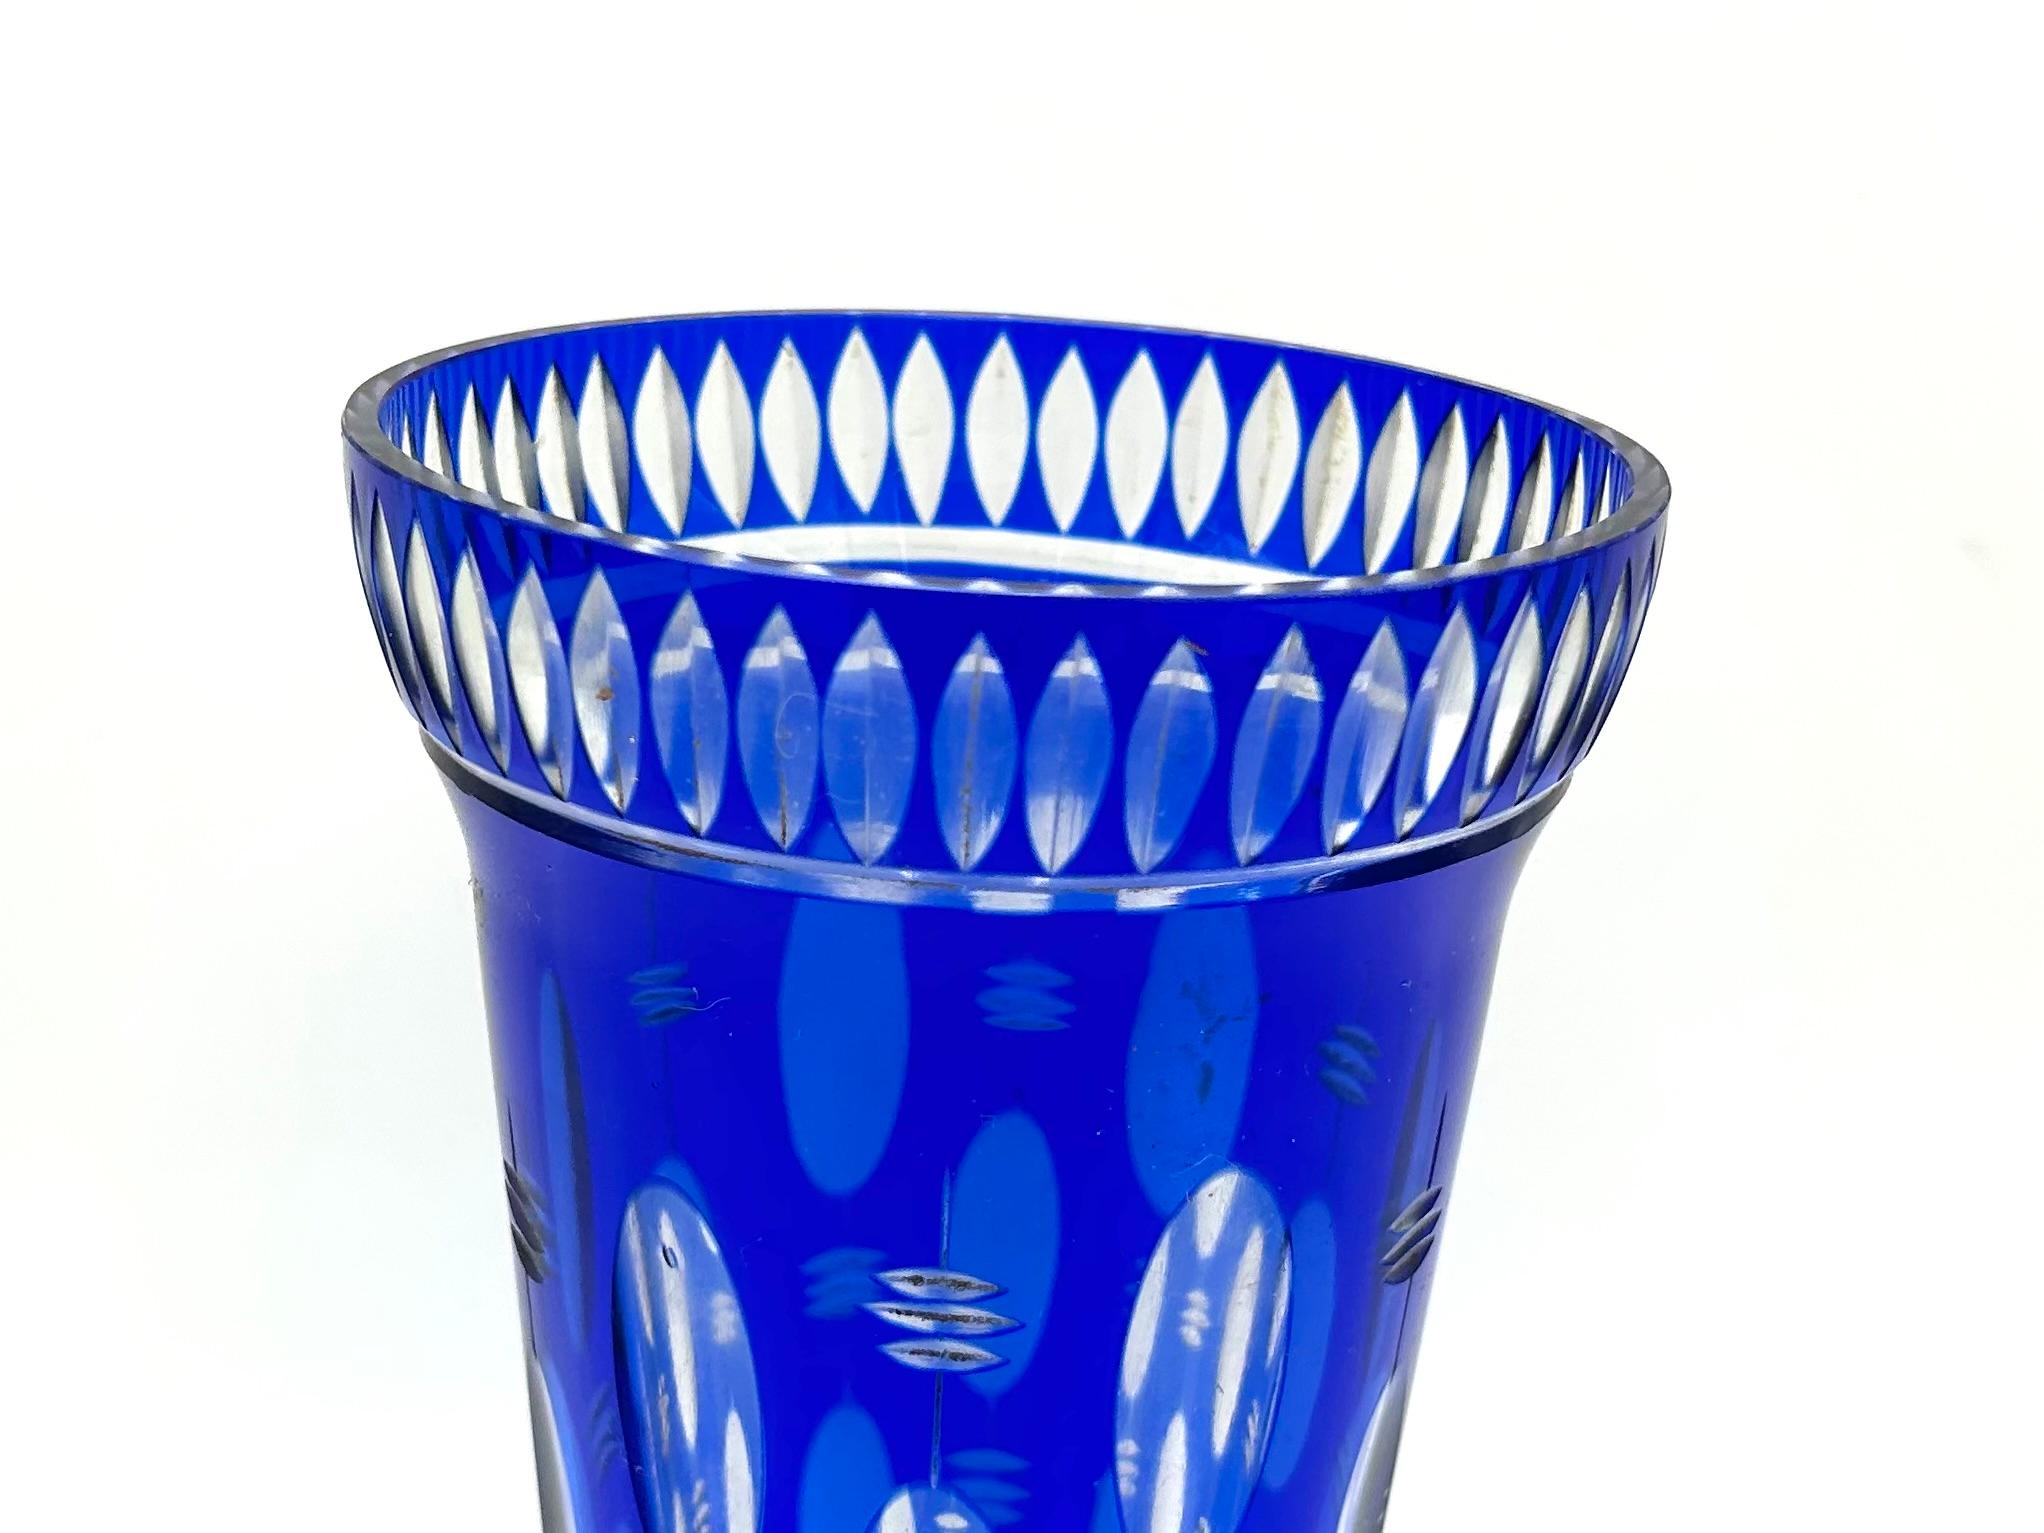 Cobalt crystal vase decorated with cut geometric patterns

Made in Poland in the 1960s.

Very good condition, no damage

Height 23 cm, diameter 12.5 cm.